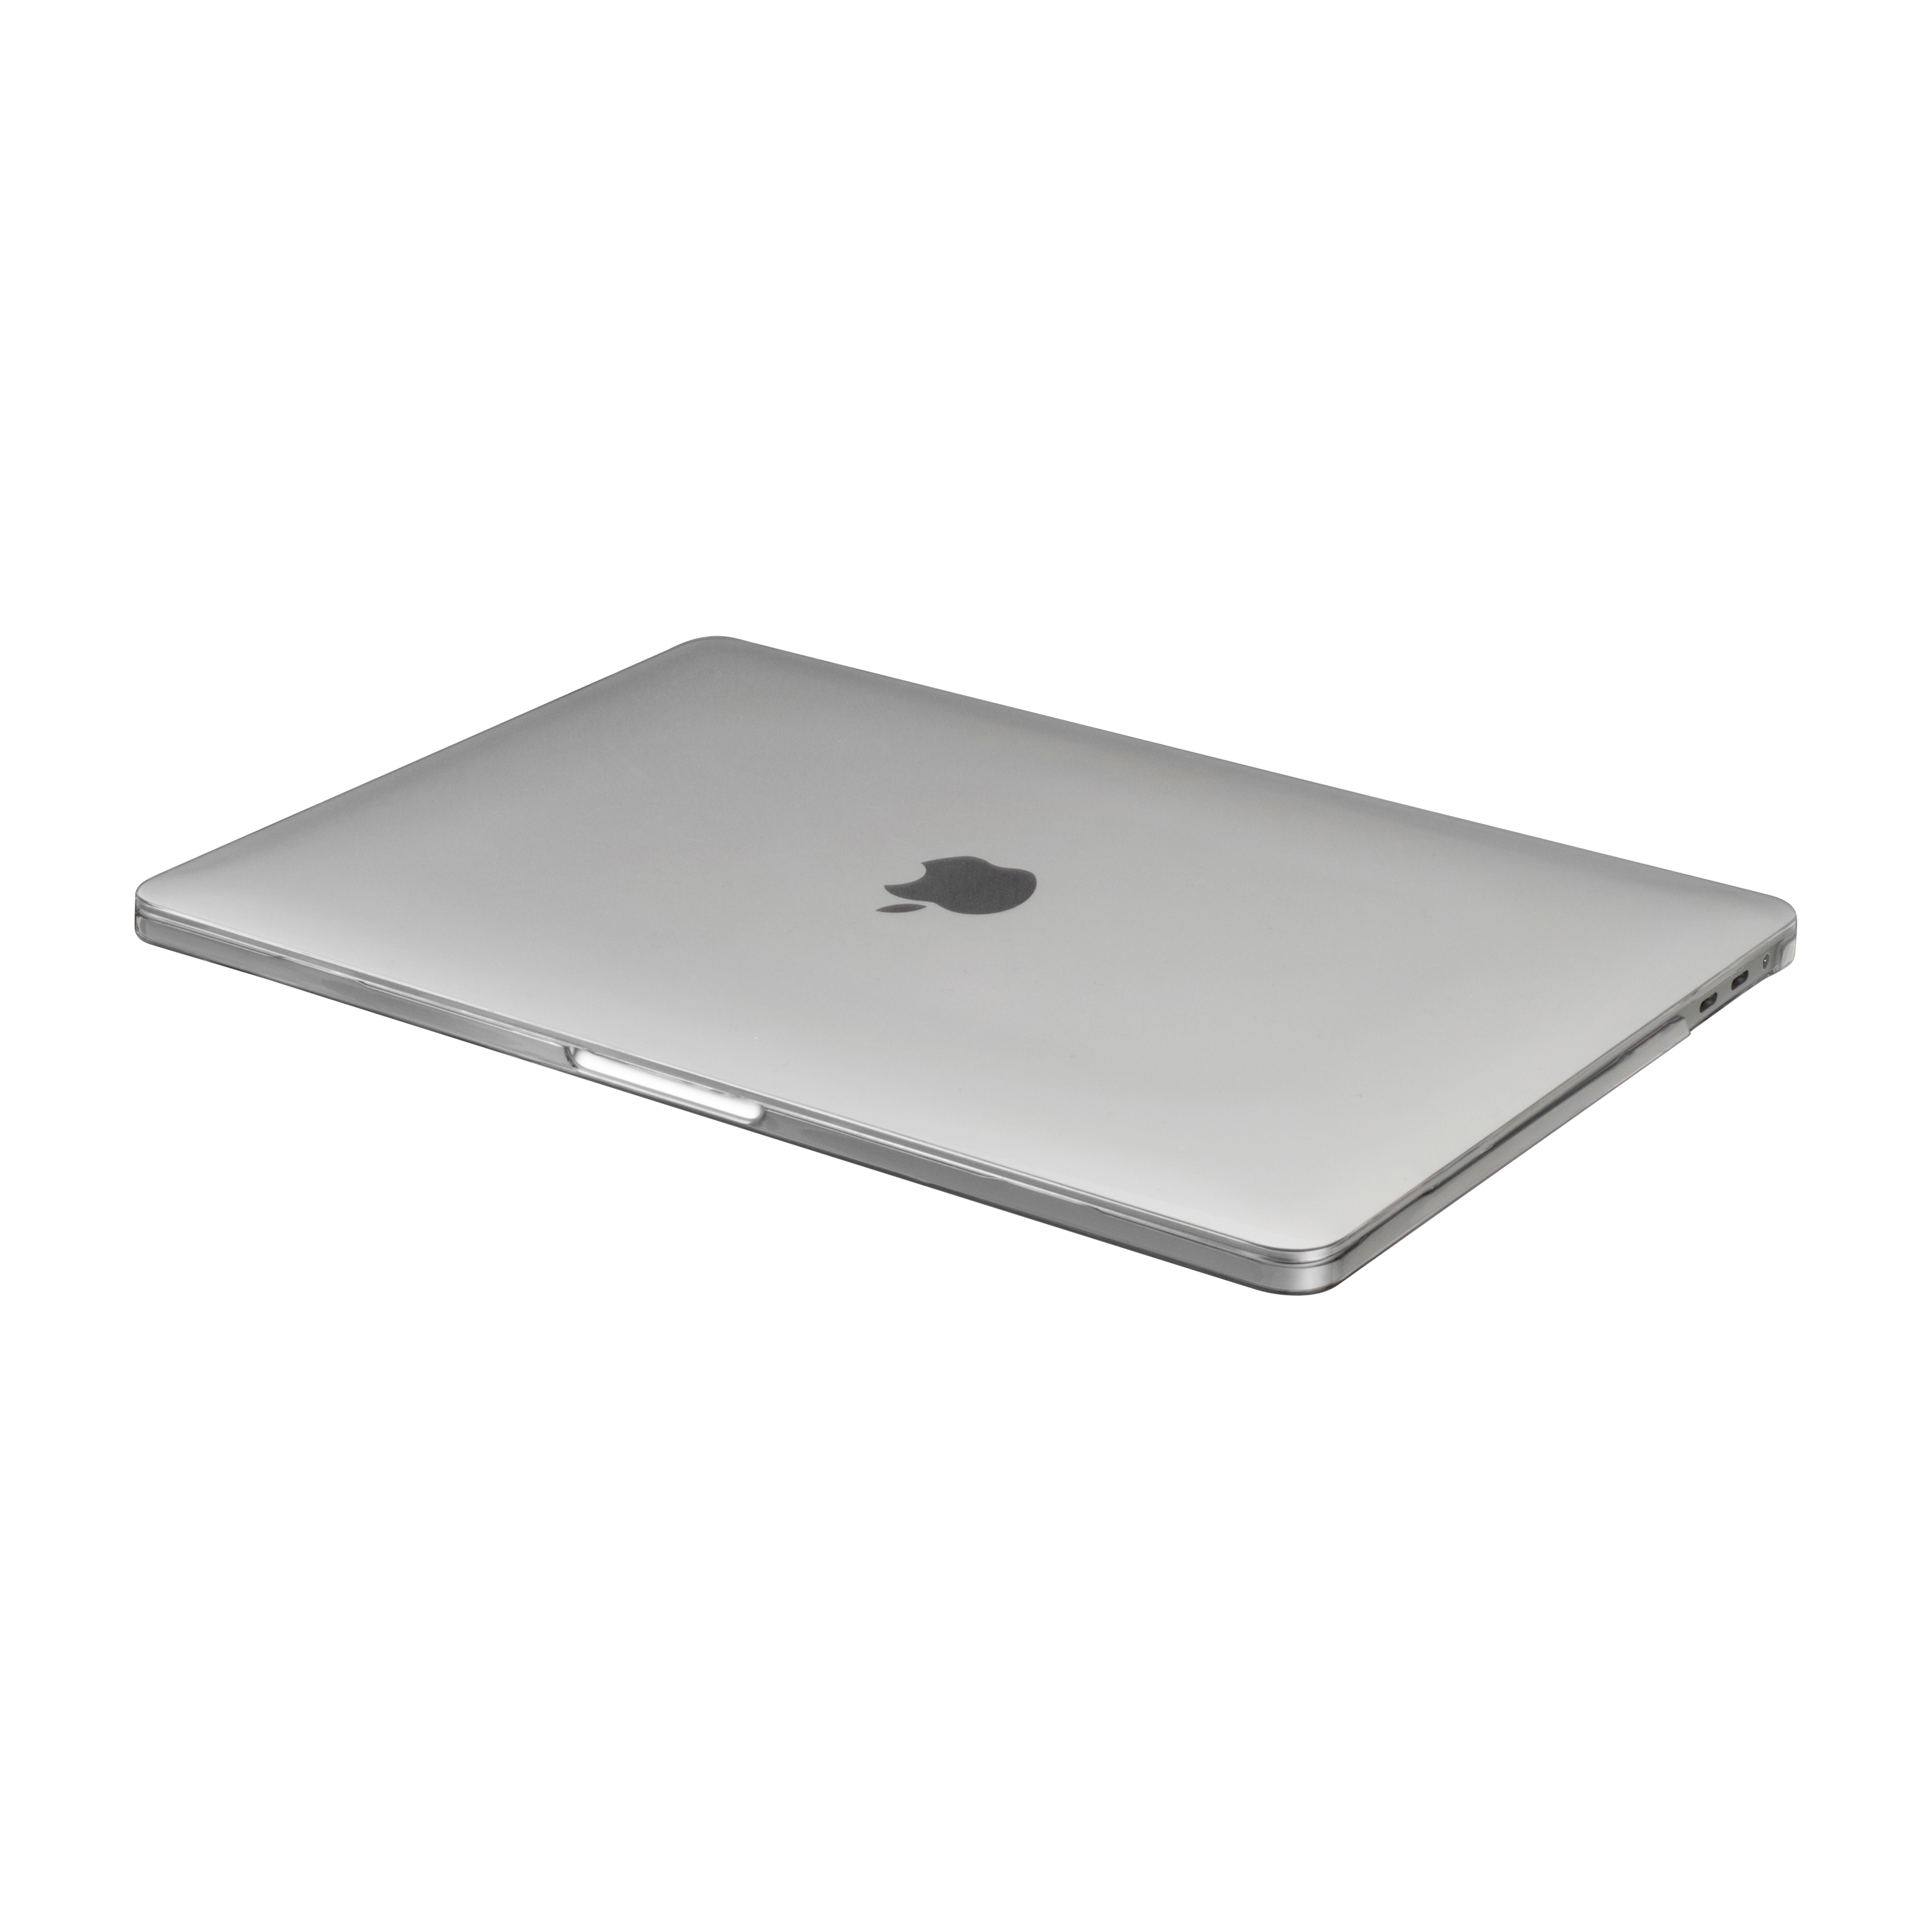 Backcover, Slim X, 16, APPLE, LAUT PRO Crystal CLEAR MACBOOK